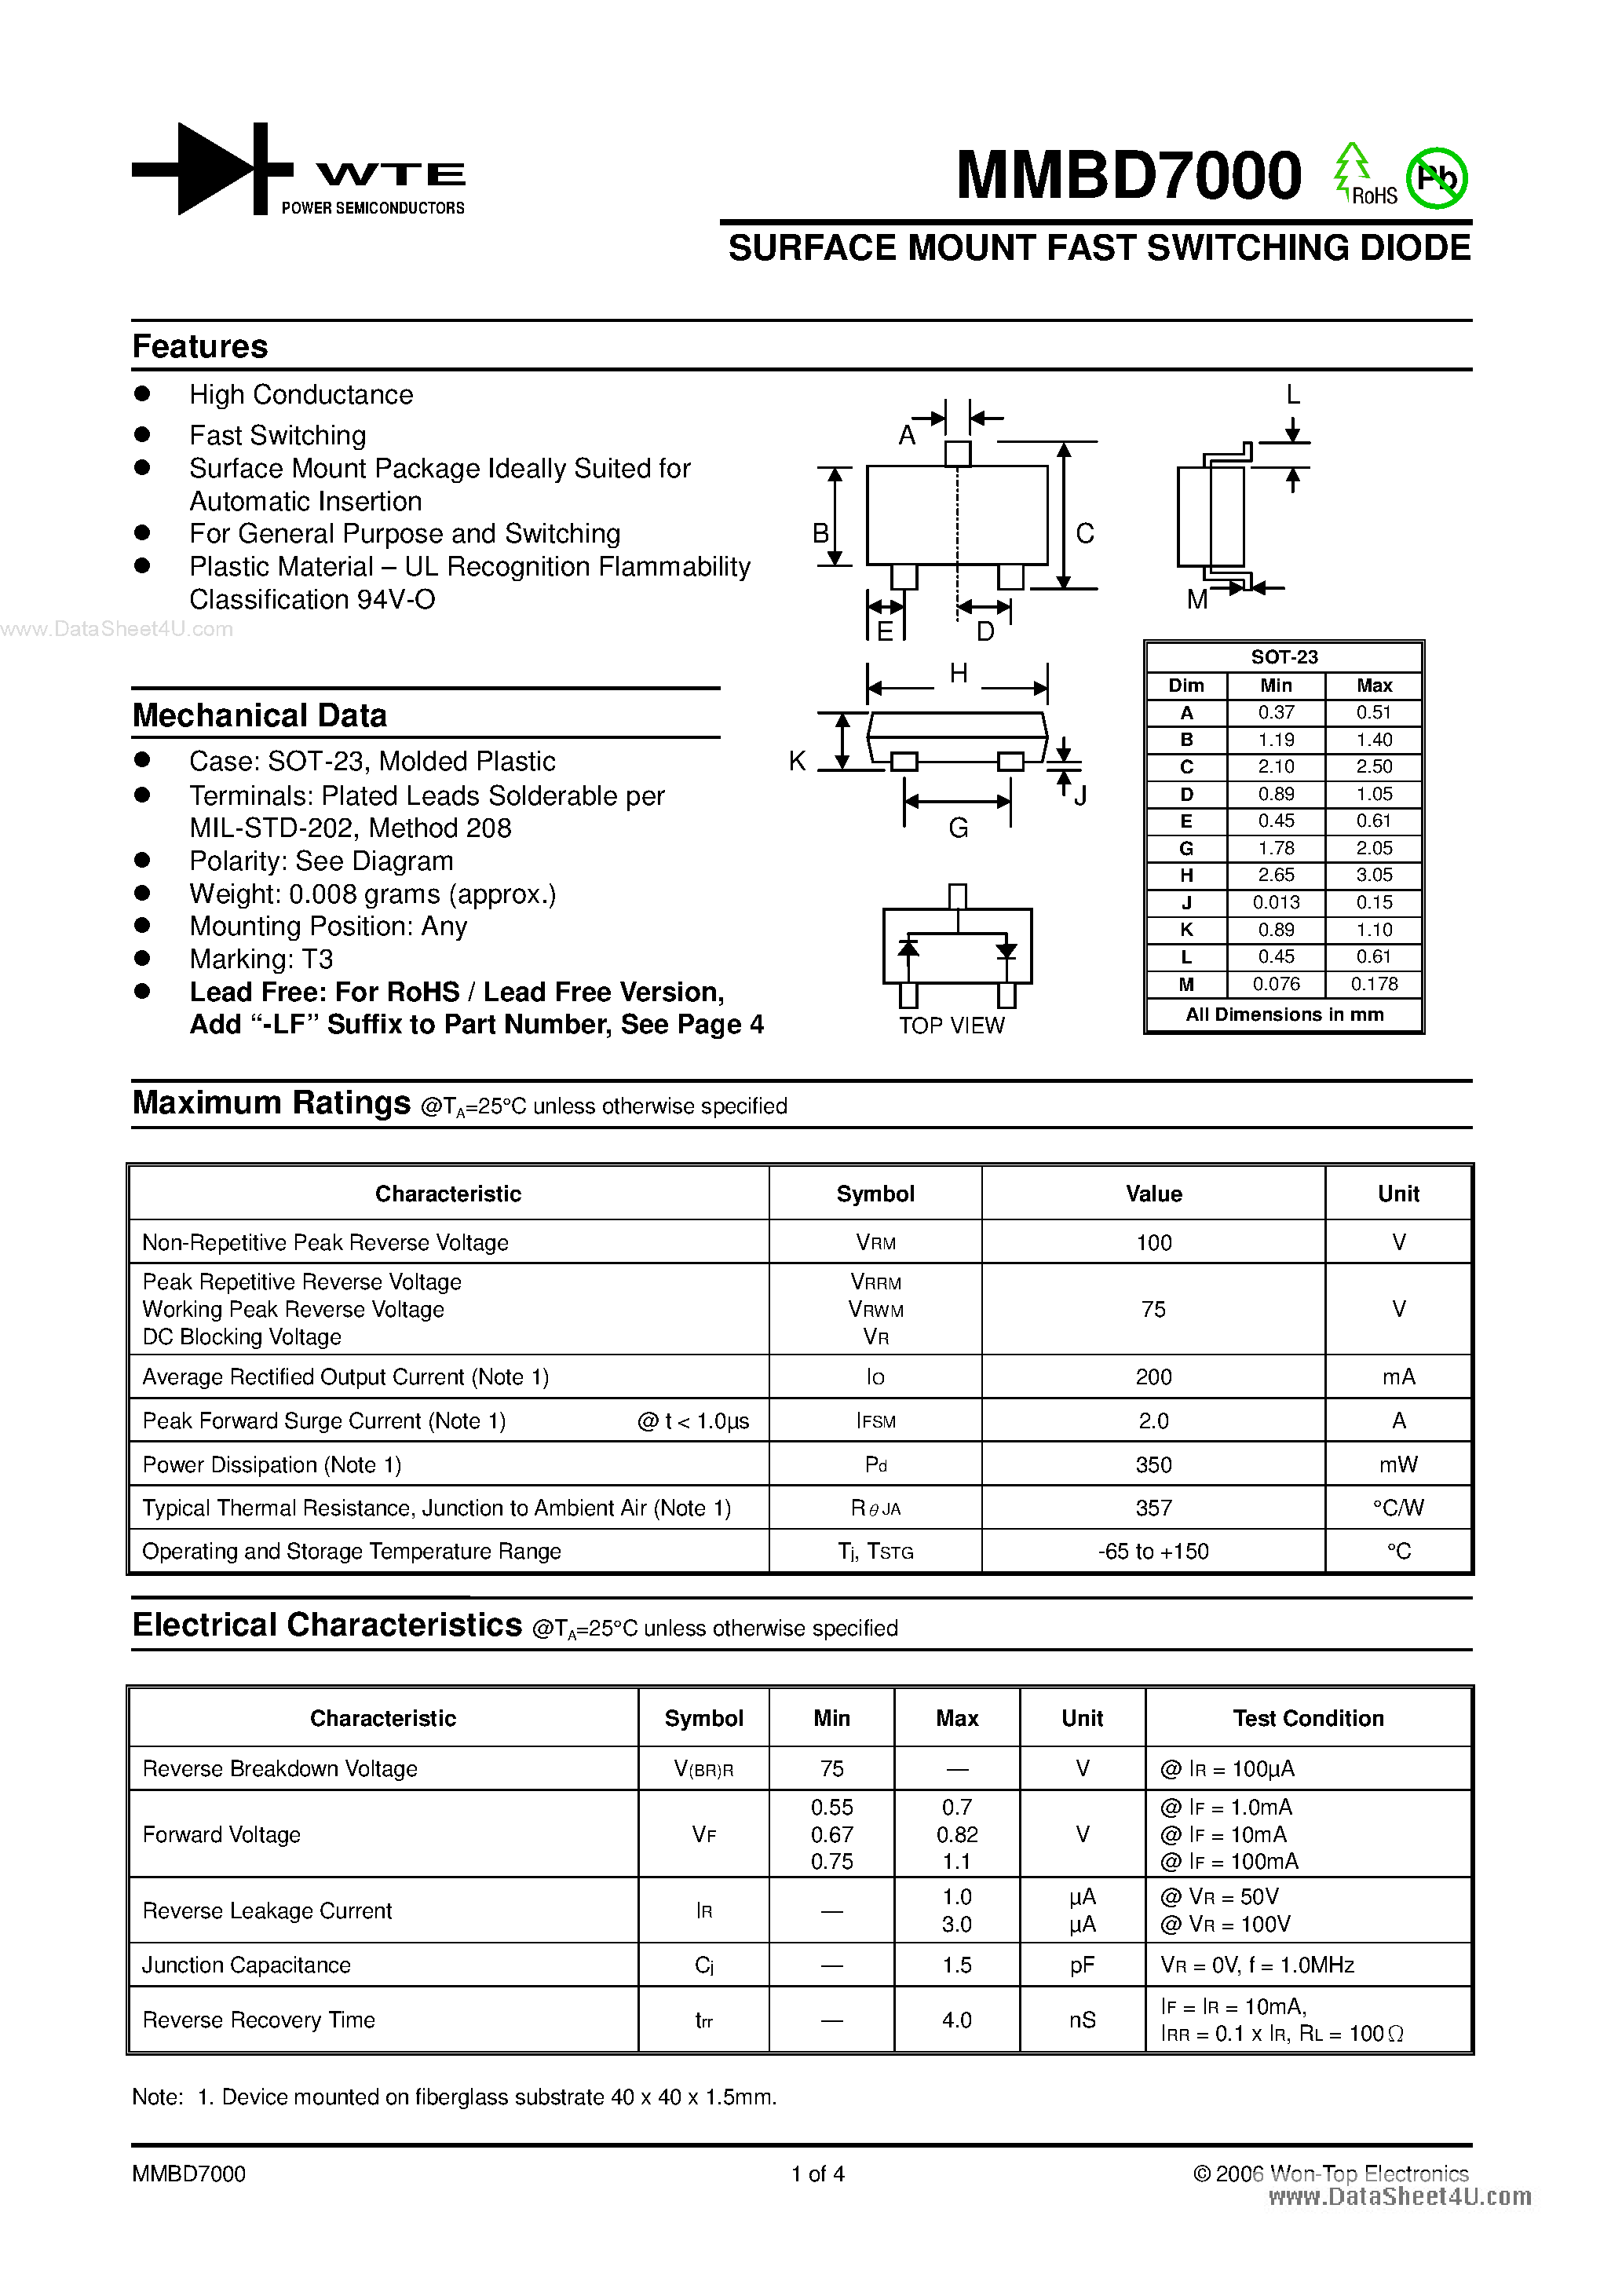 Datasheet MMBD7000 - SURFACE MOUNT FAST SWITCHING DIODE page 1